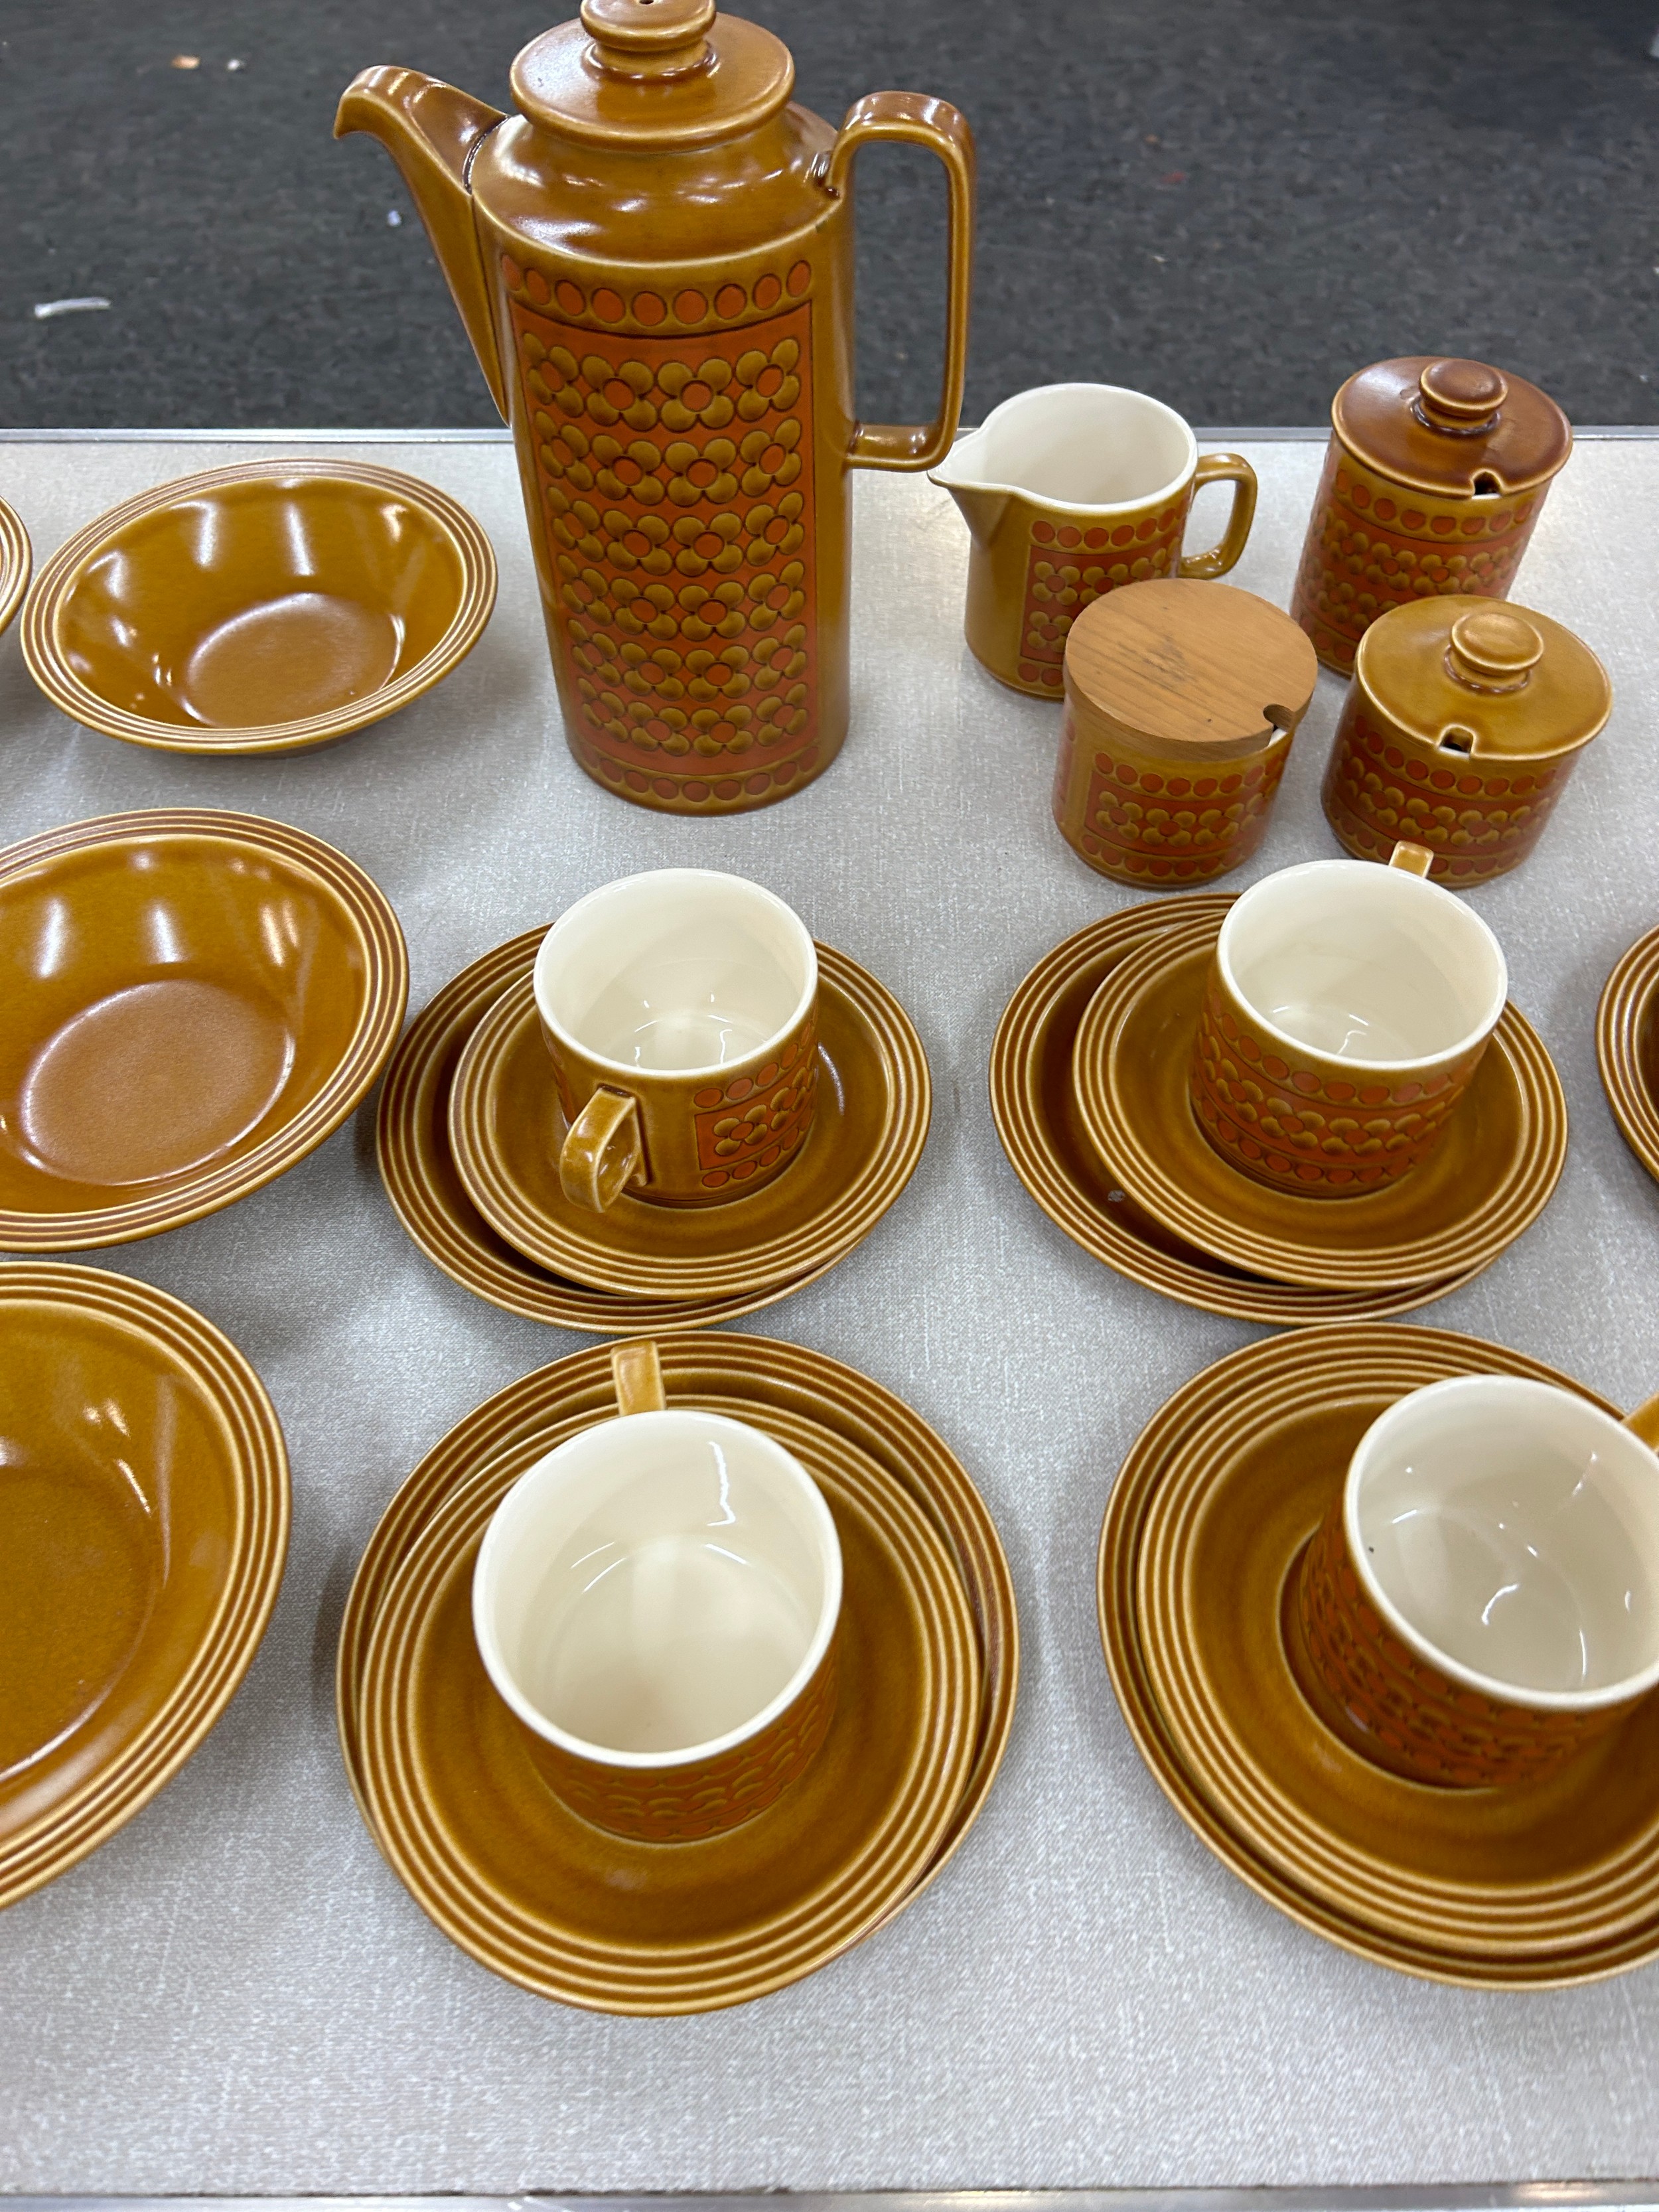 Large selection of Hornsea tea and dinner service